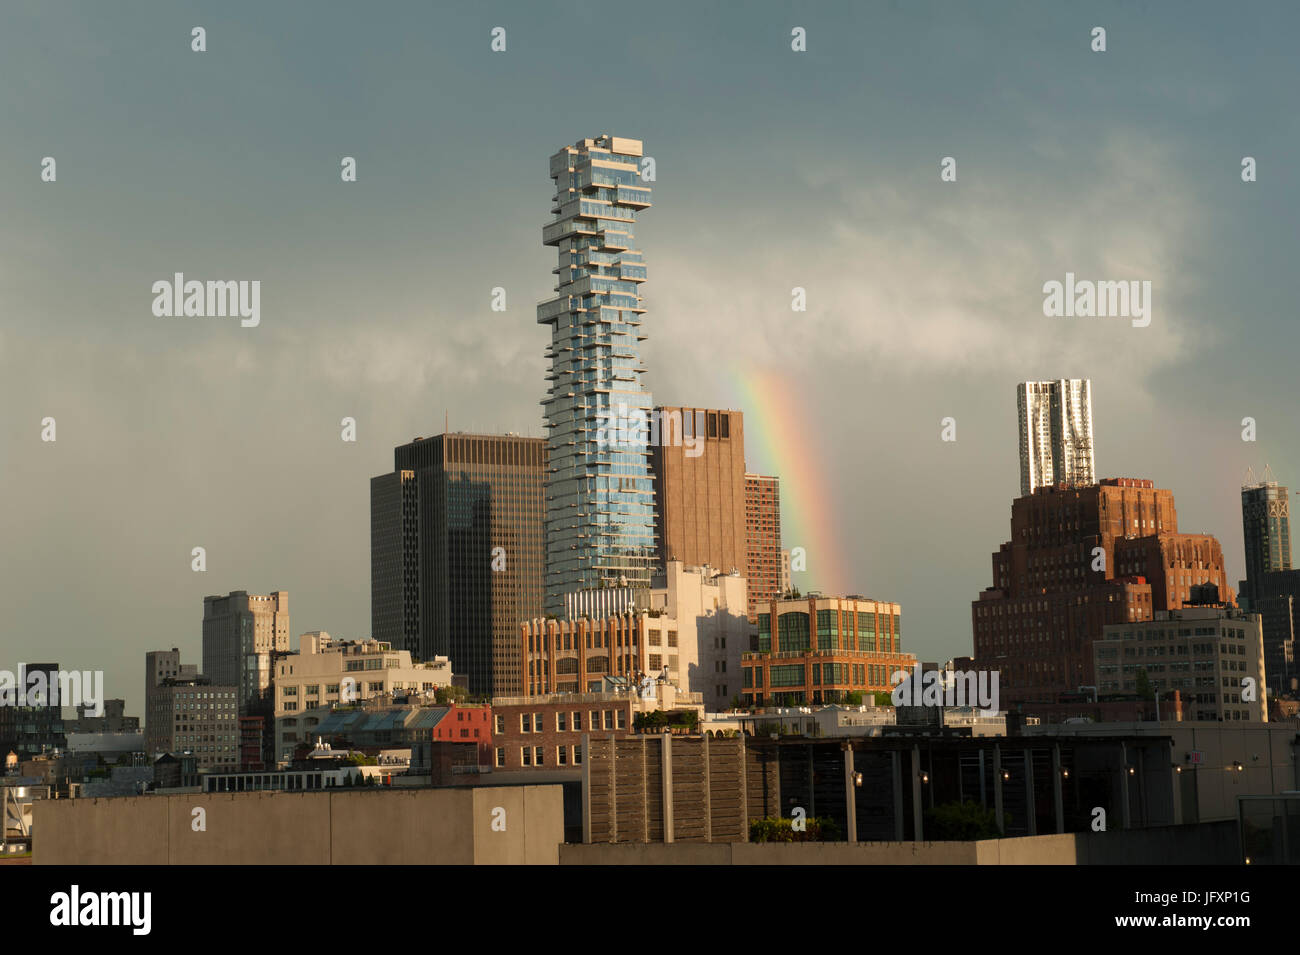 After a storm, a rainbow appeared over Tribeca, a neighborhood in Manhattan dominated by the skyscraper at 56 Leonard St. Stock Photo